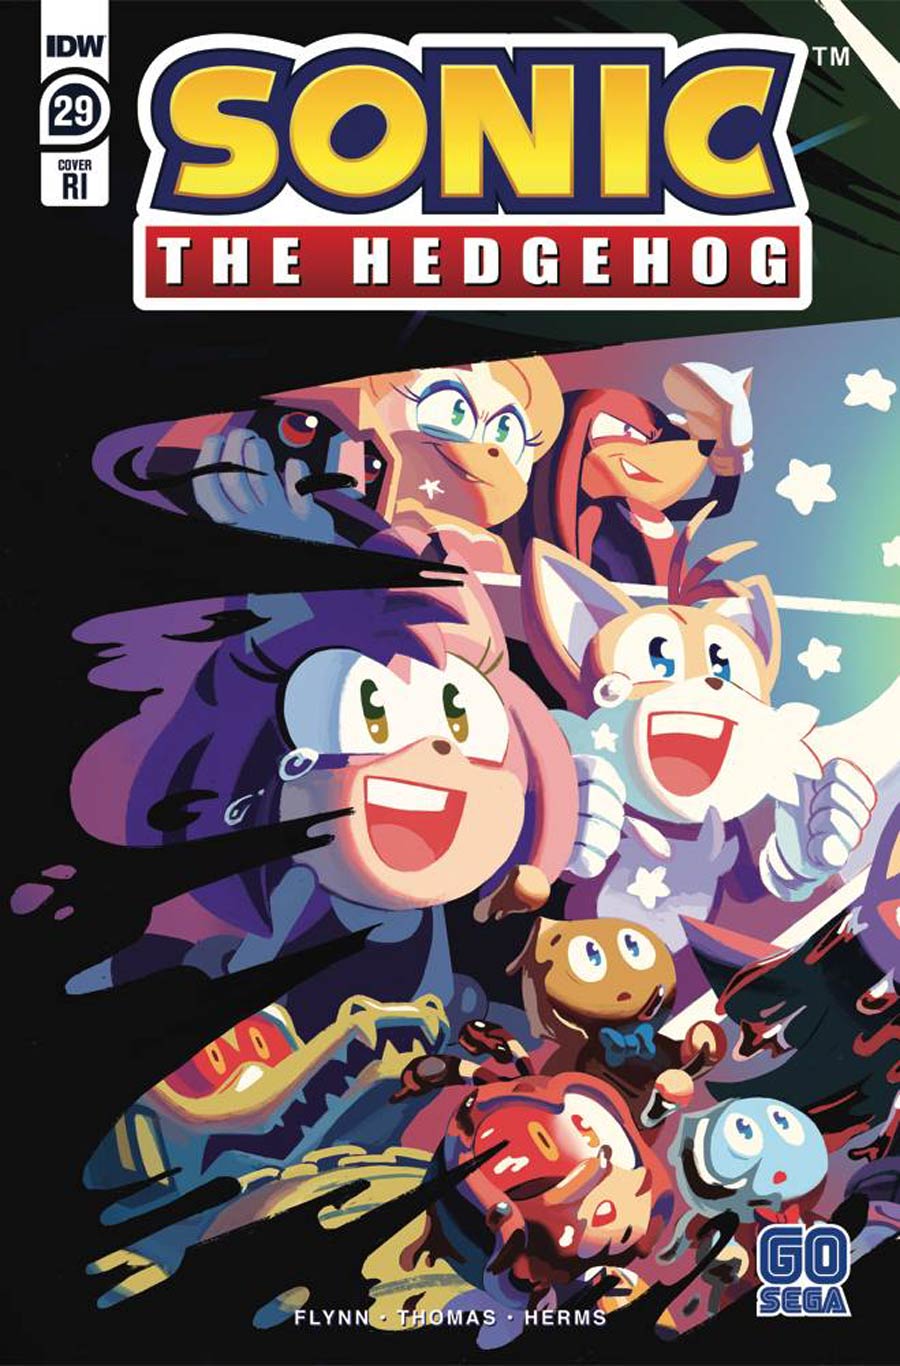 Sonic The Hedgehog Vol 3 #29 Cover C Incentive Nathalie Fourdraine Variant Cover